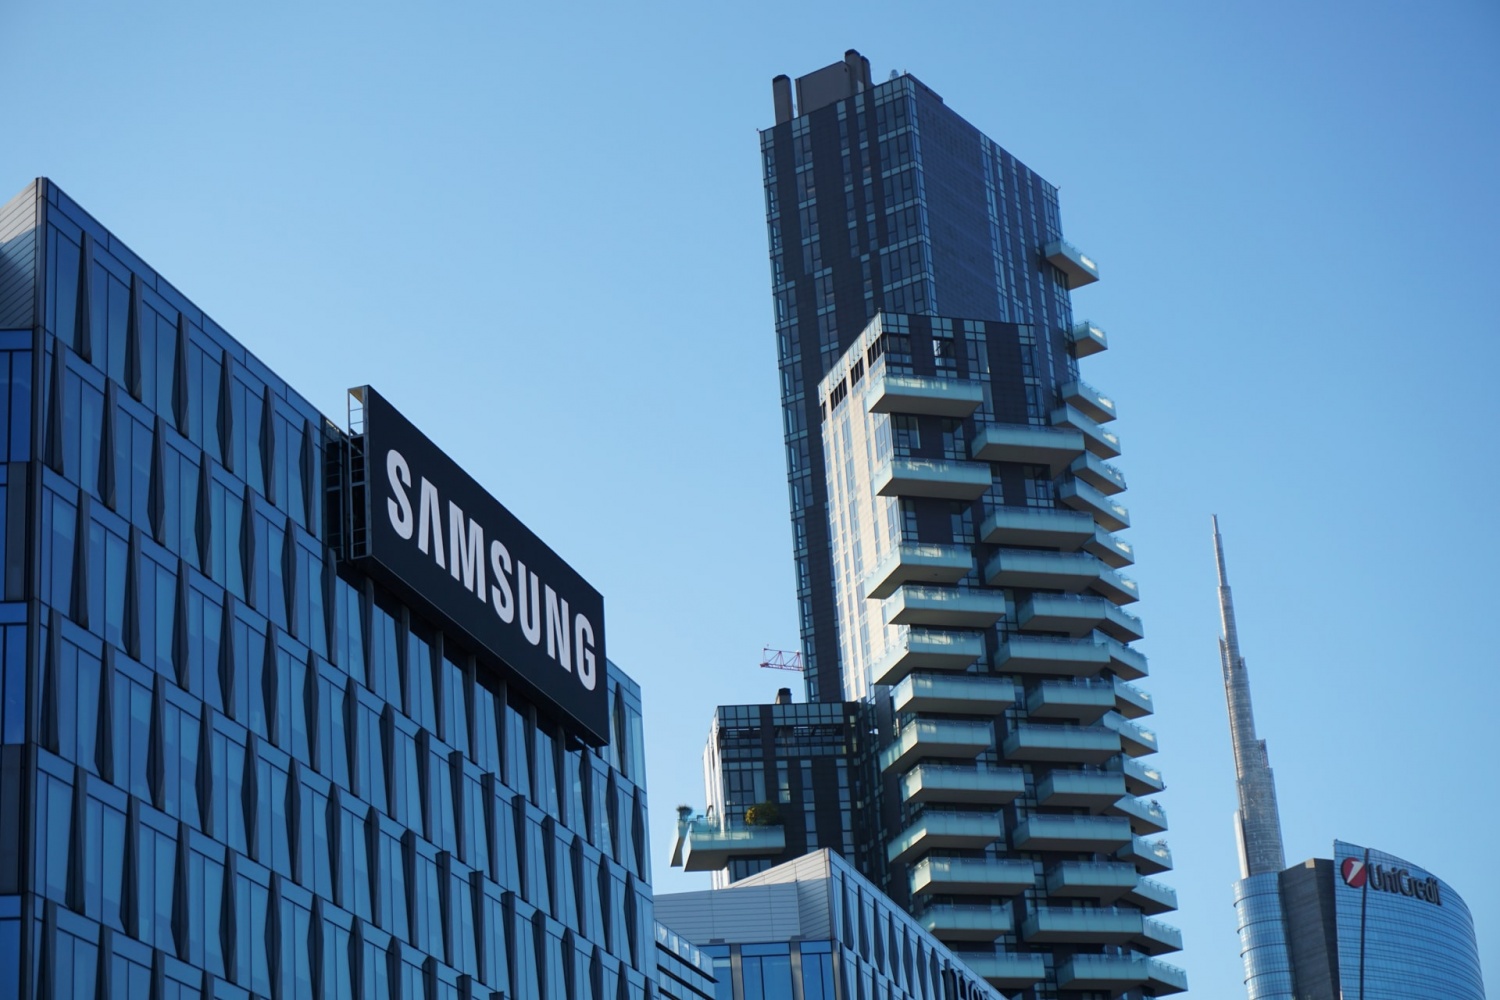 Samsung to Generate 80,000 Jobs While Spending $355 Billion for Next-Gen Tech